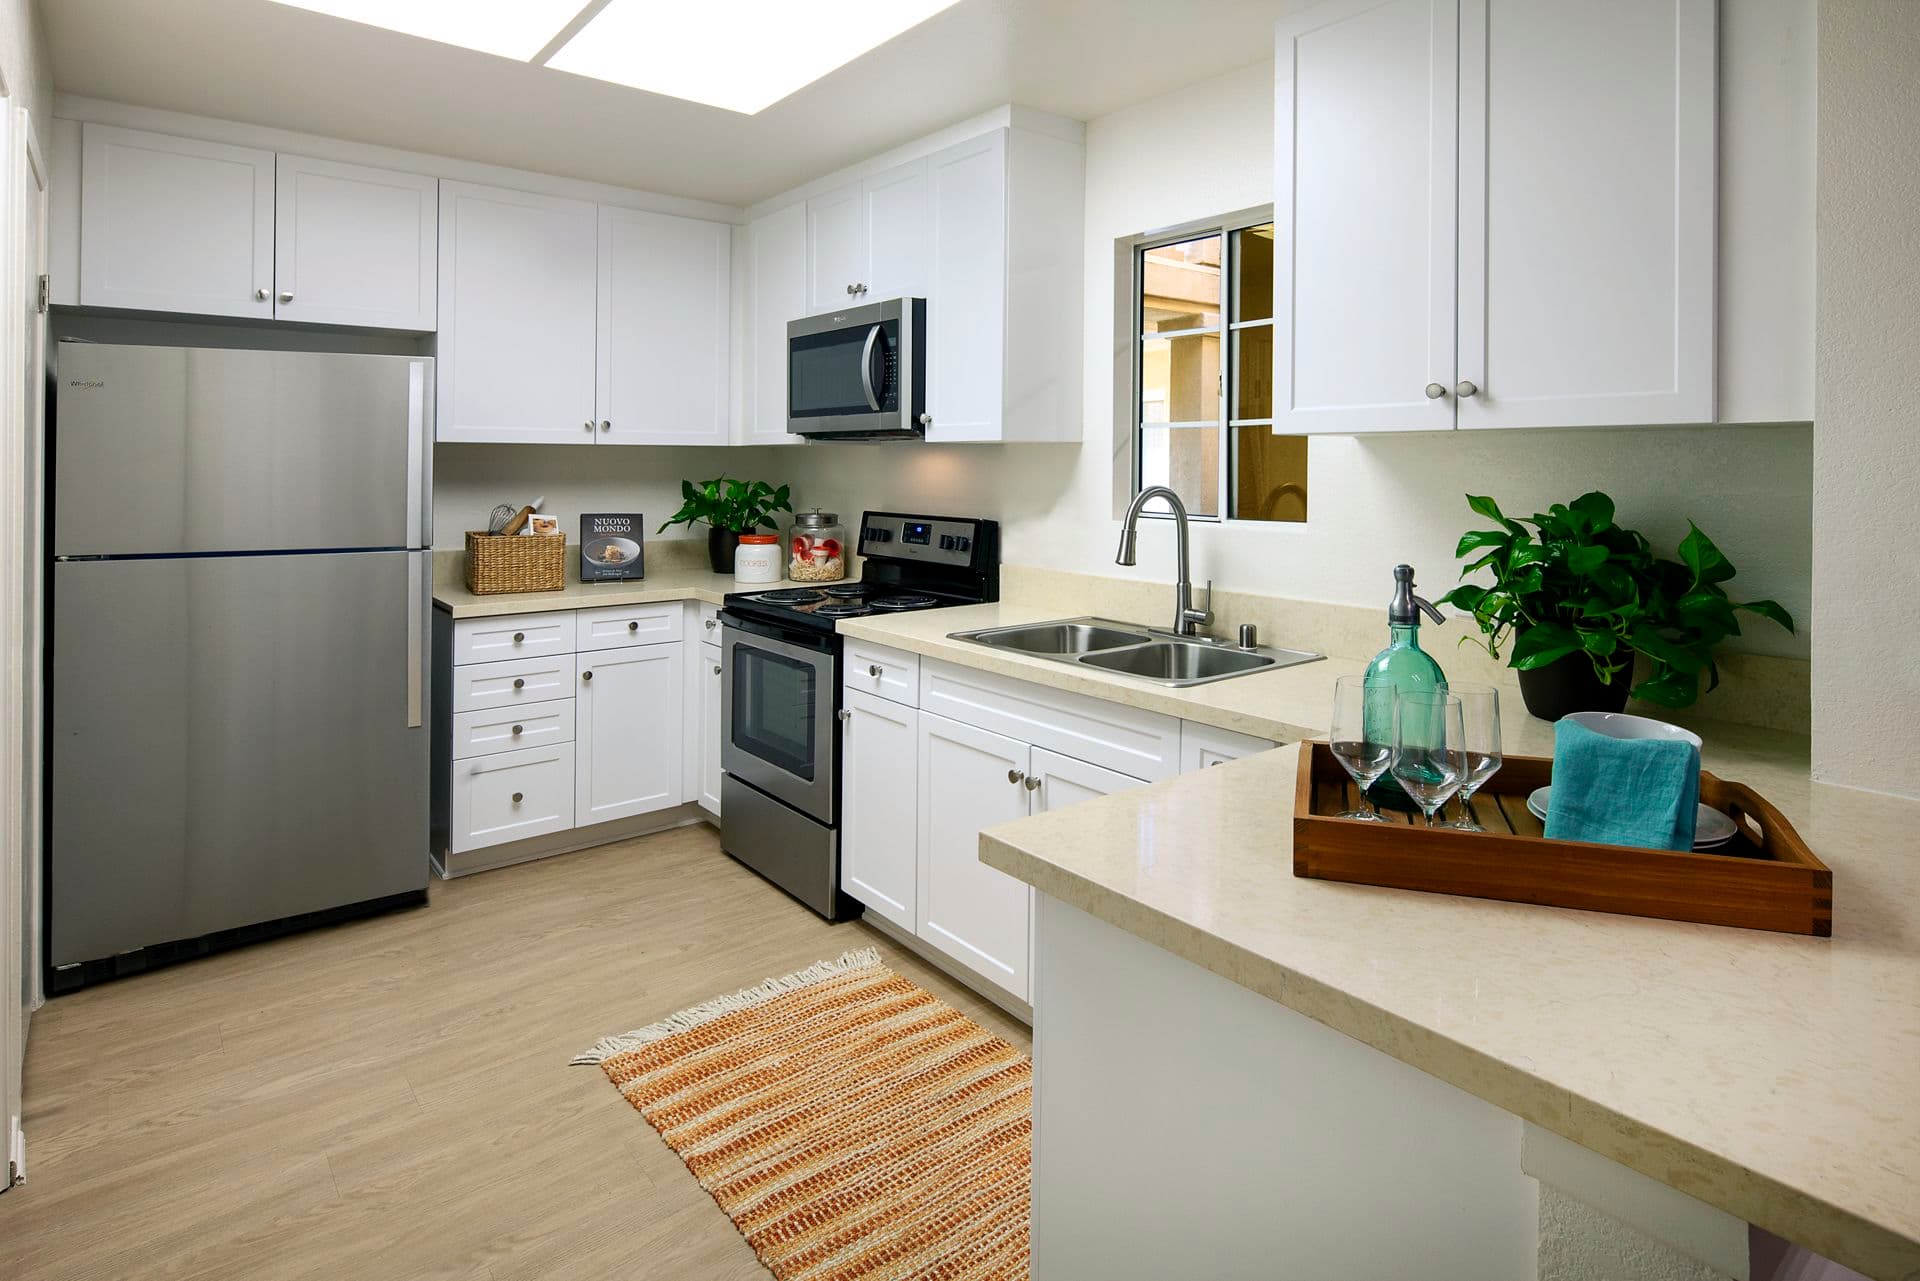 Interior view of kitchen of San Paulo Apartment Homes in Irvine, CA.